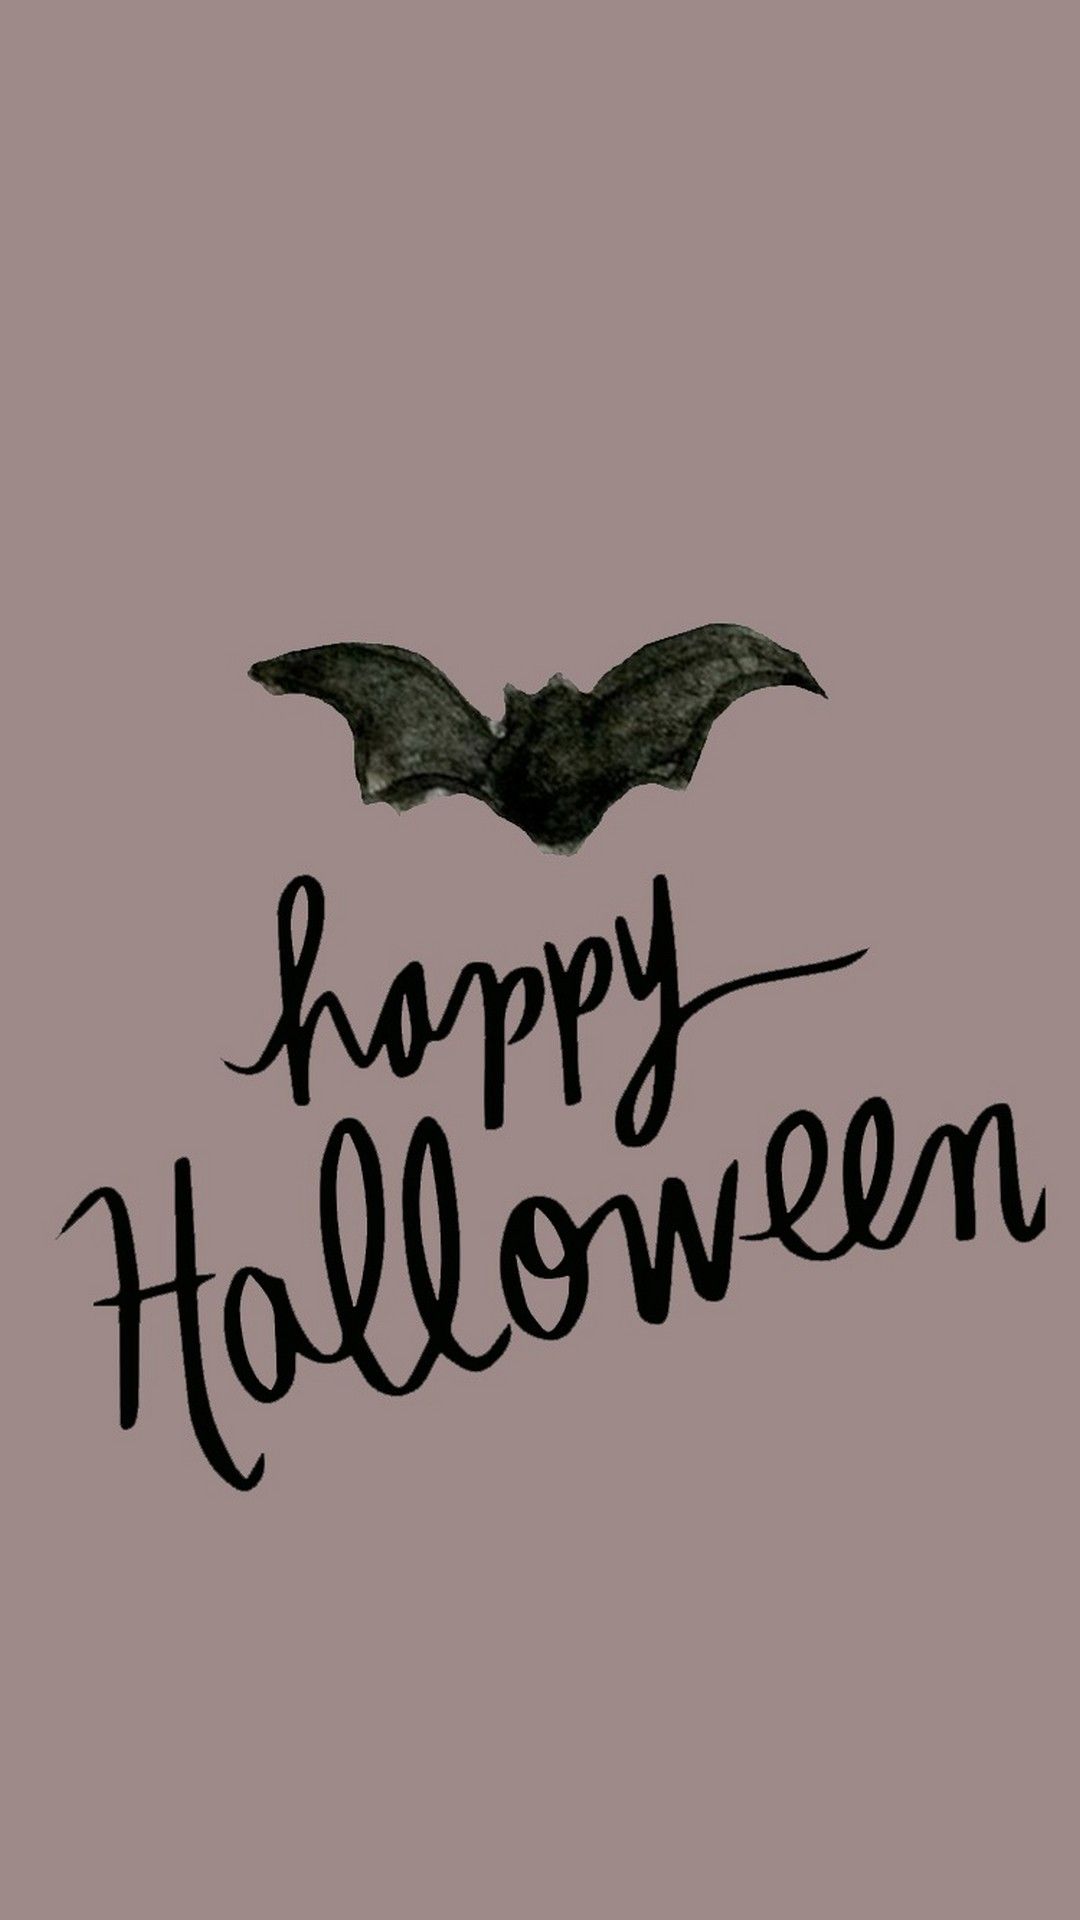 Halloween phone background with a bat and the words 